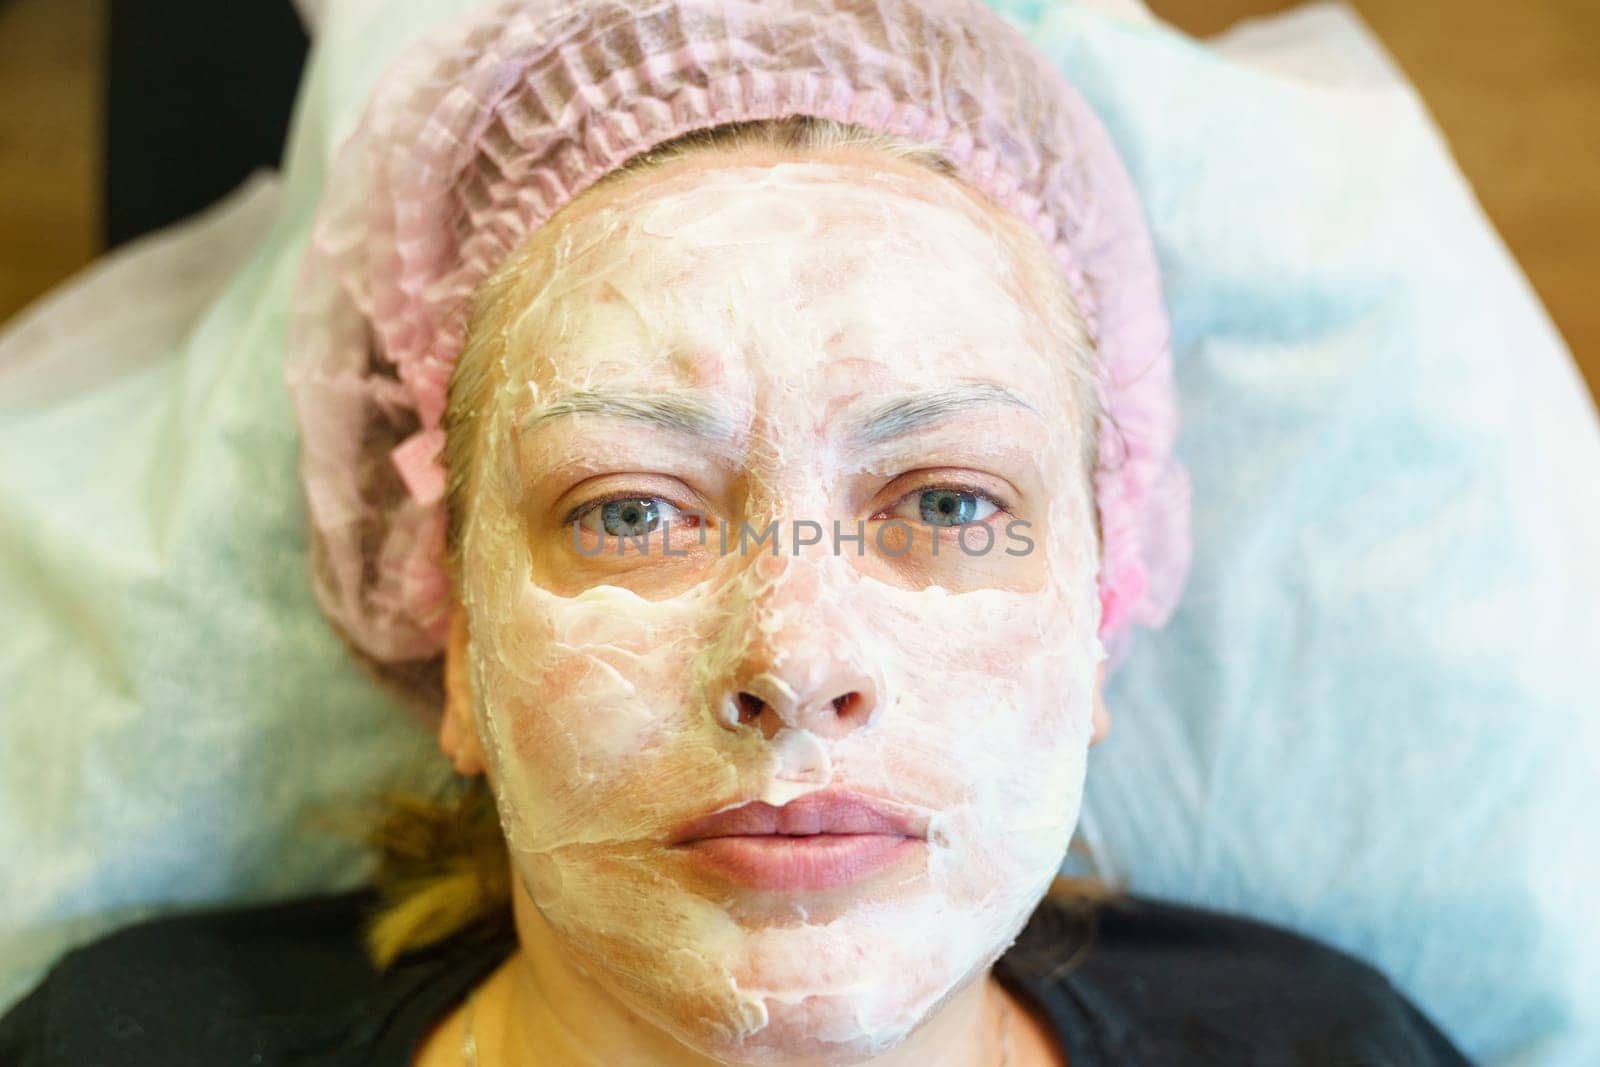 A woman is laying on a bed with a white facial mask applied, showing a skincare routine at home.